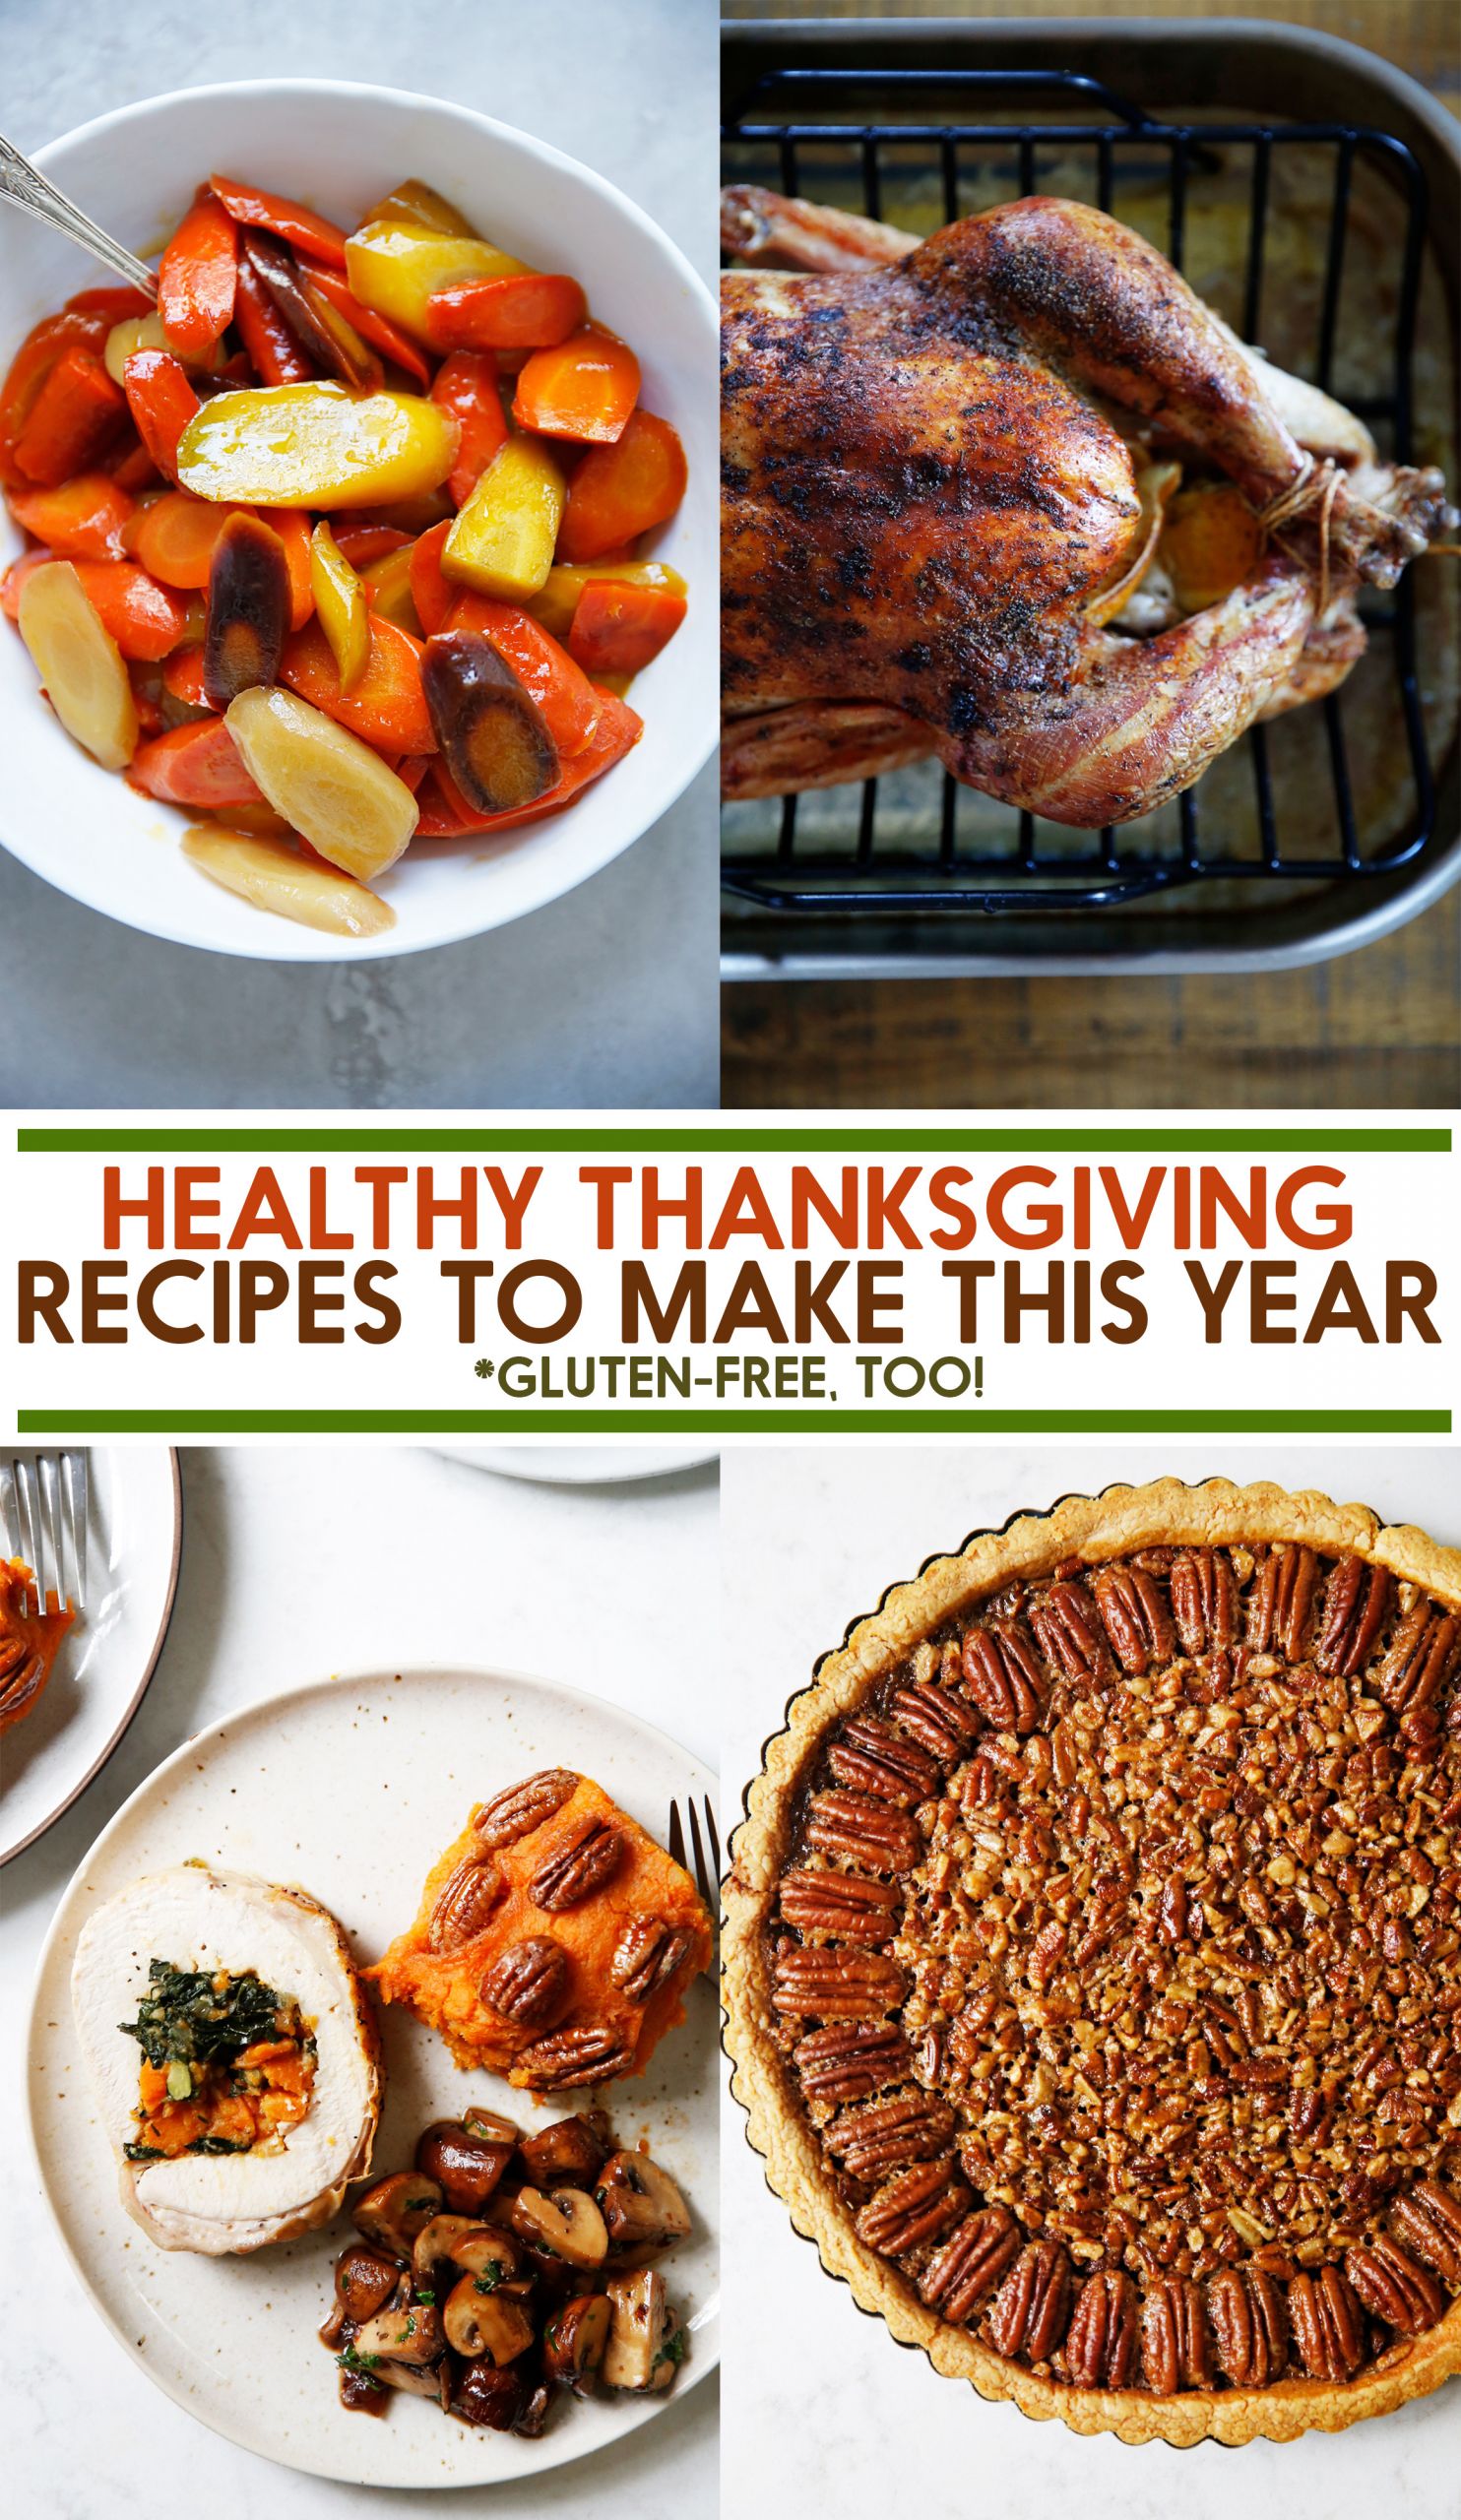 Dairy Free Thanksgiving Recipes
 Lexi s Clean Kitchen